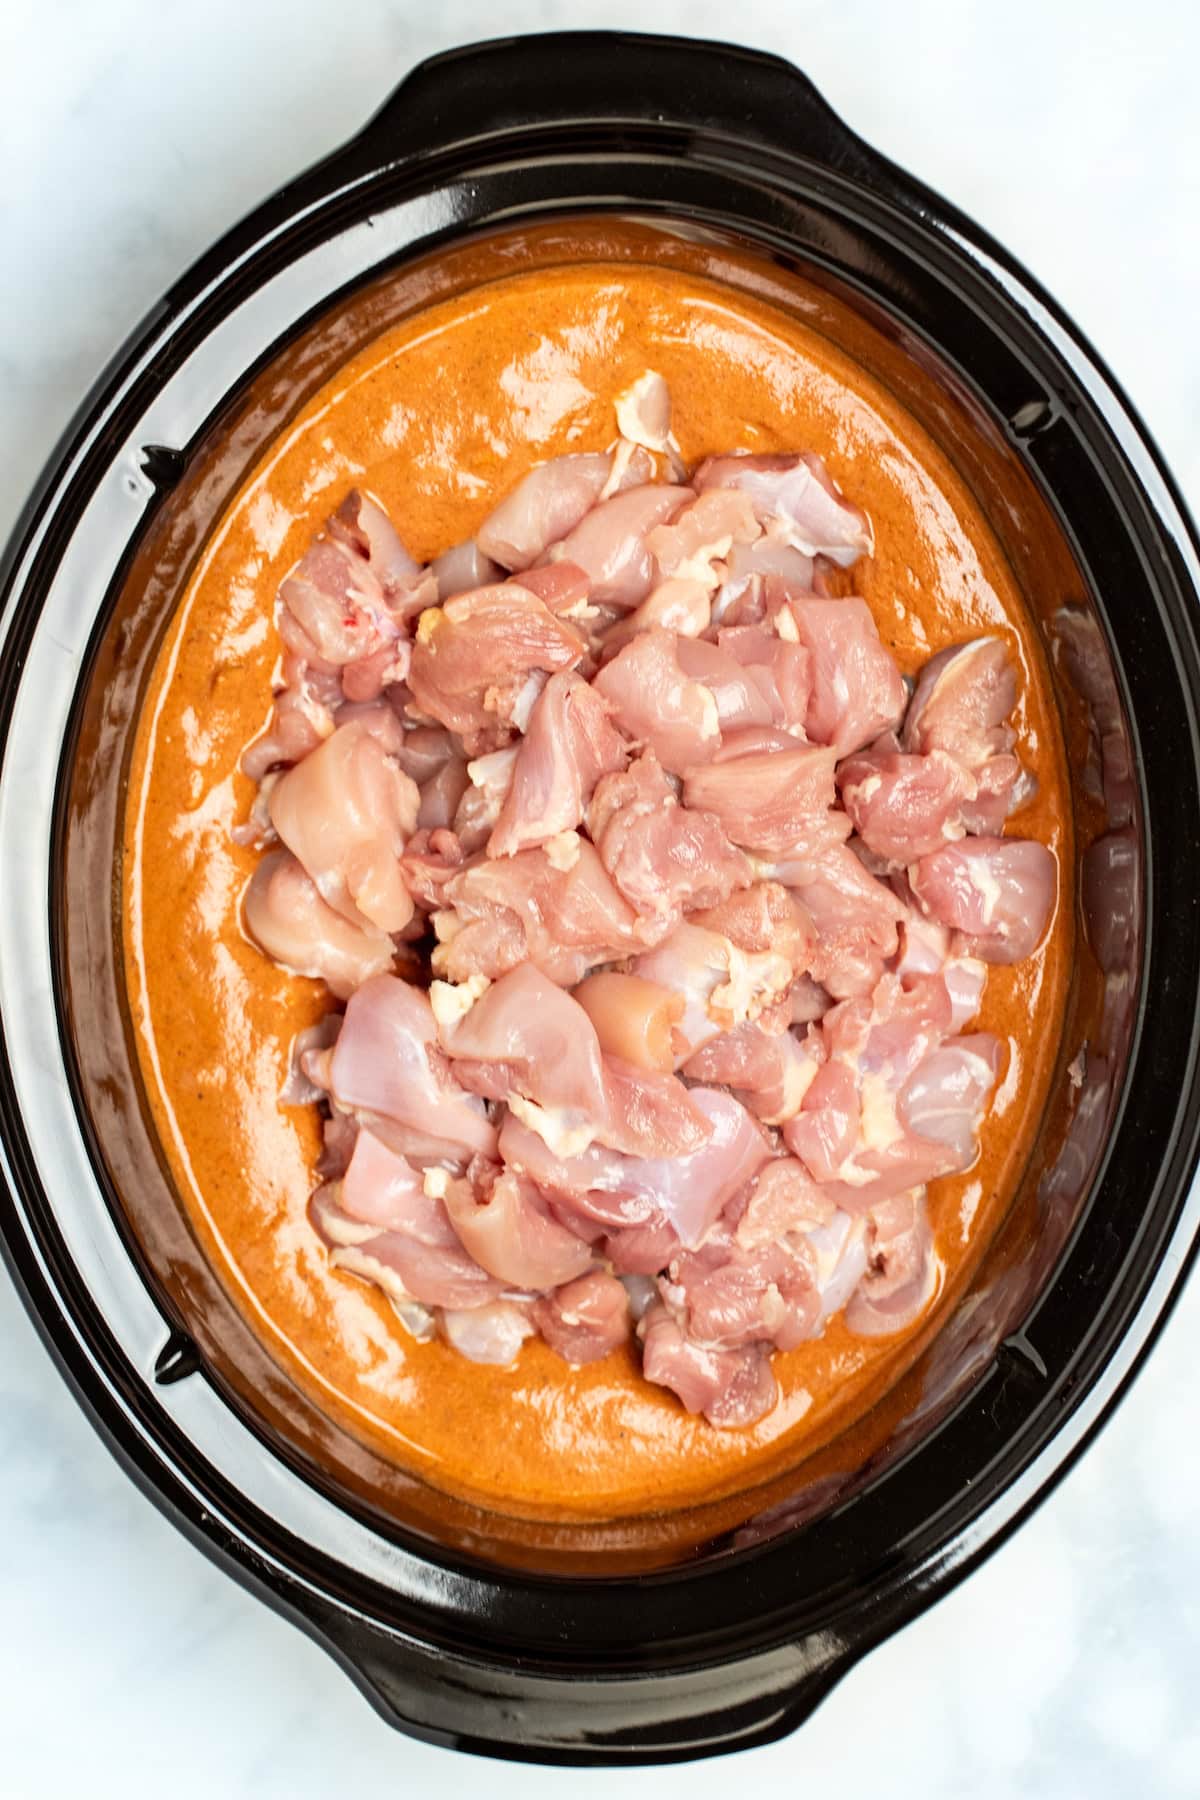 A slow cooker dish with tomato based sauce filling the bottom of the pot with raw pieces of chicken resting on top.